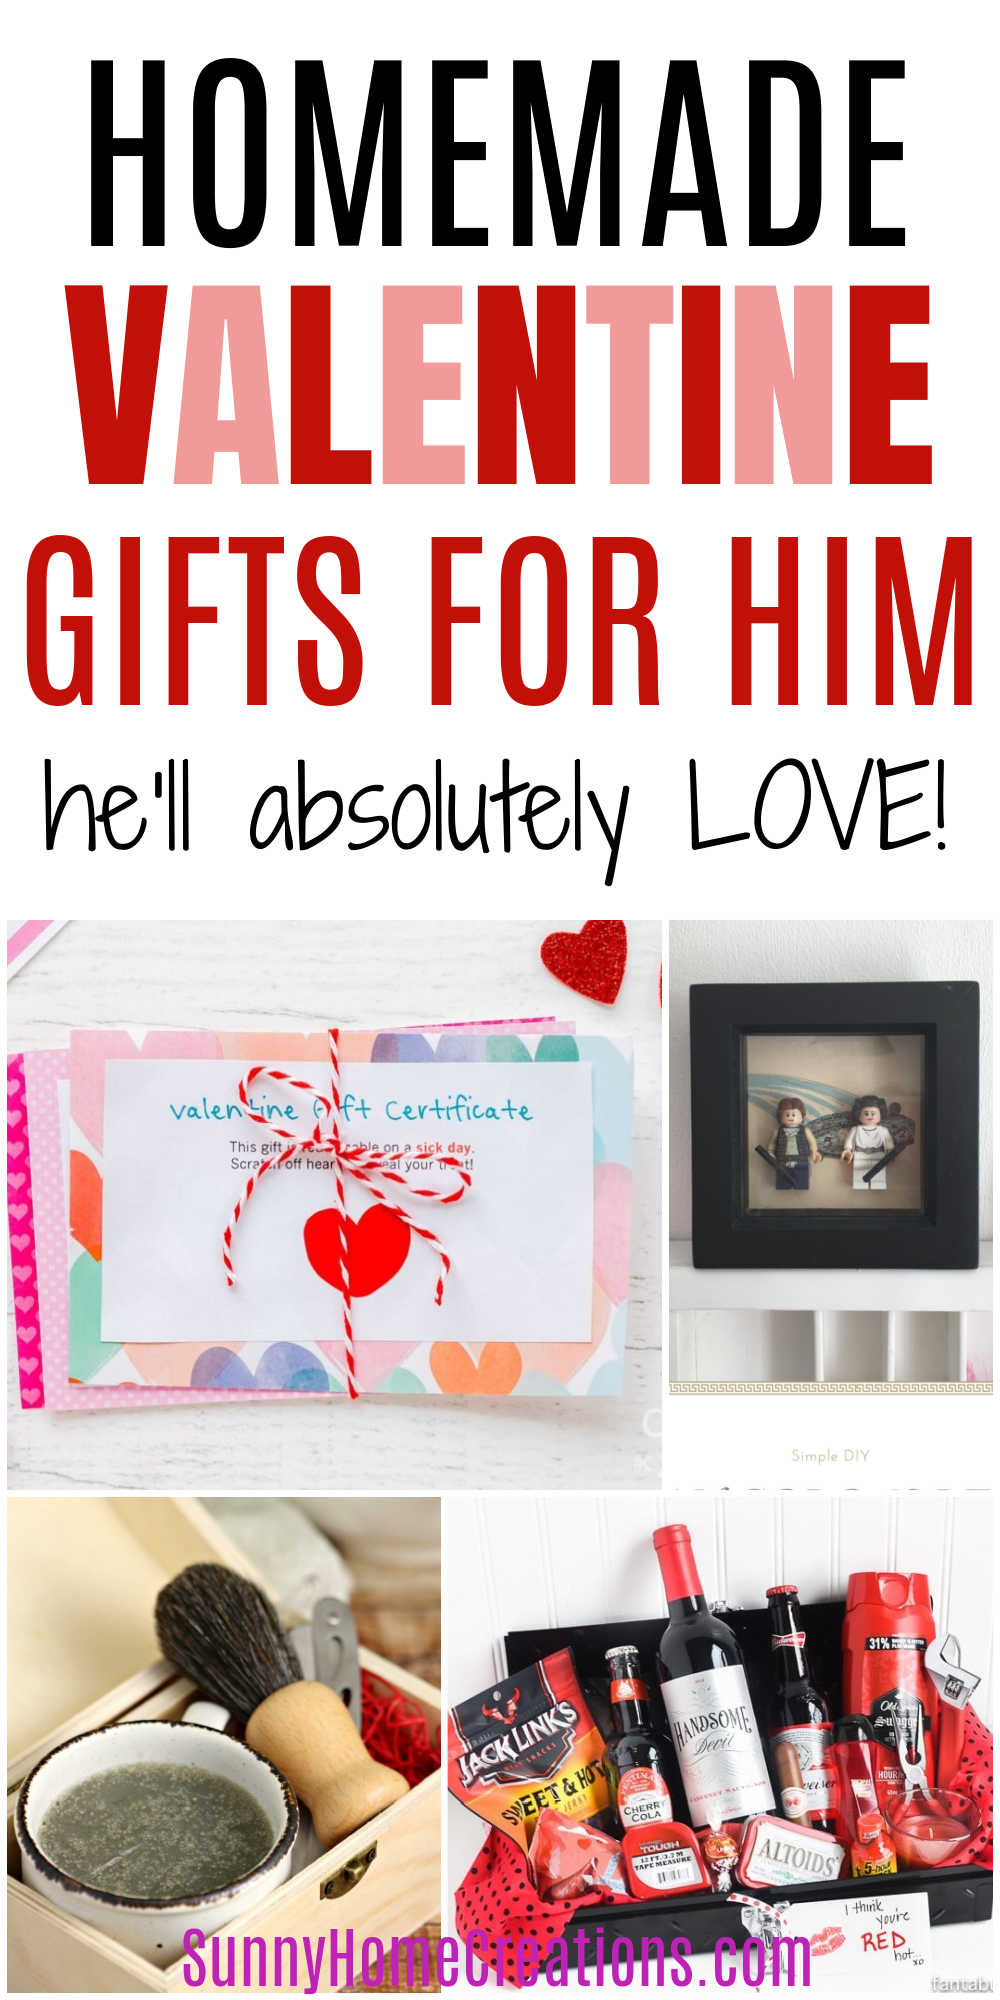 Pin image: top says "Homemade Valentine gifts for him he'll absolutely love", bottom has a collage of love coupons, Lego pic frame, red hot kit, and shaving cream set.